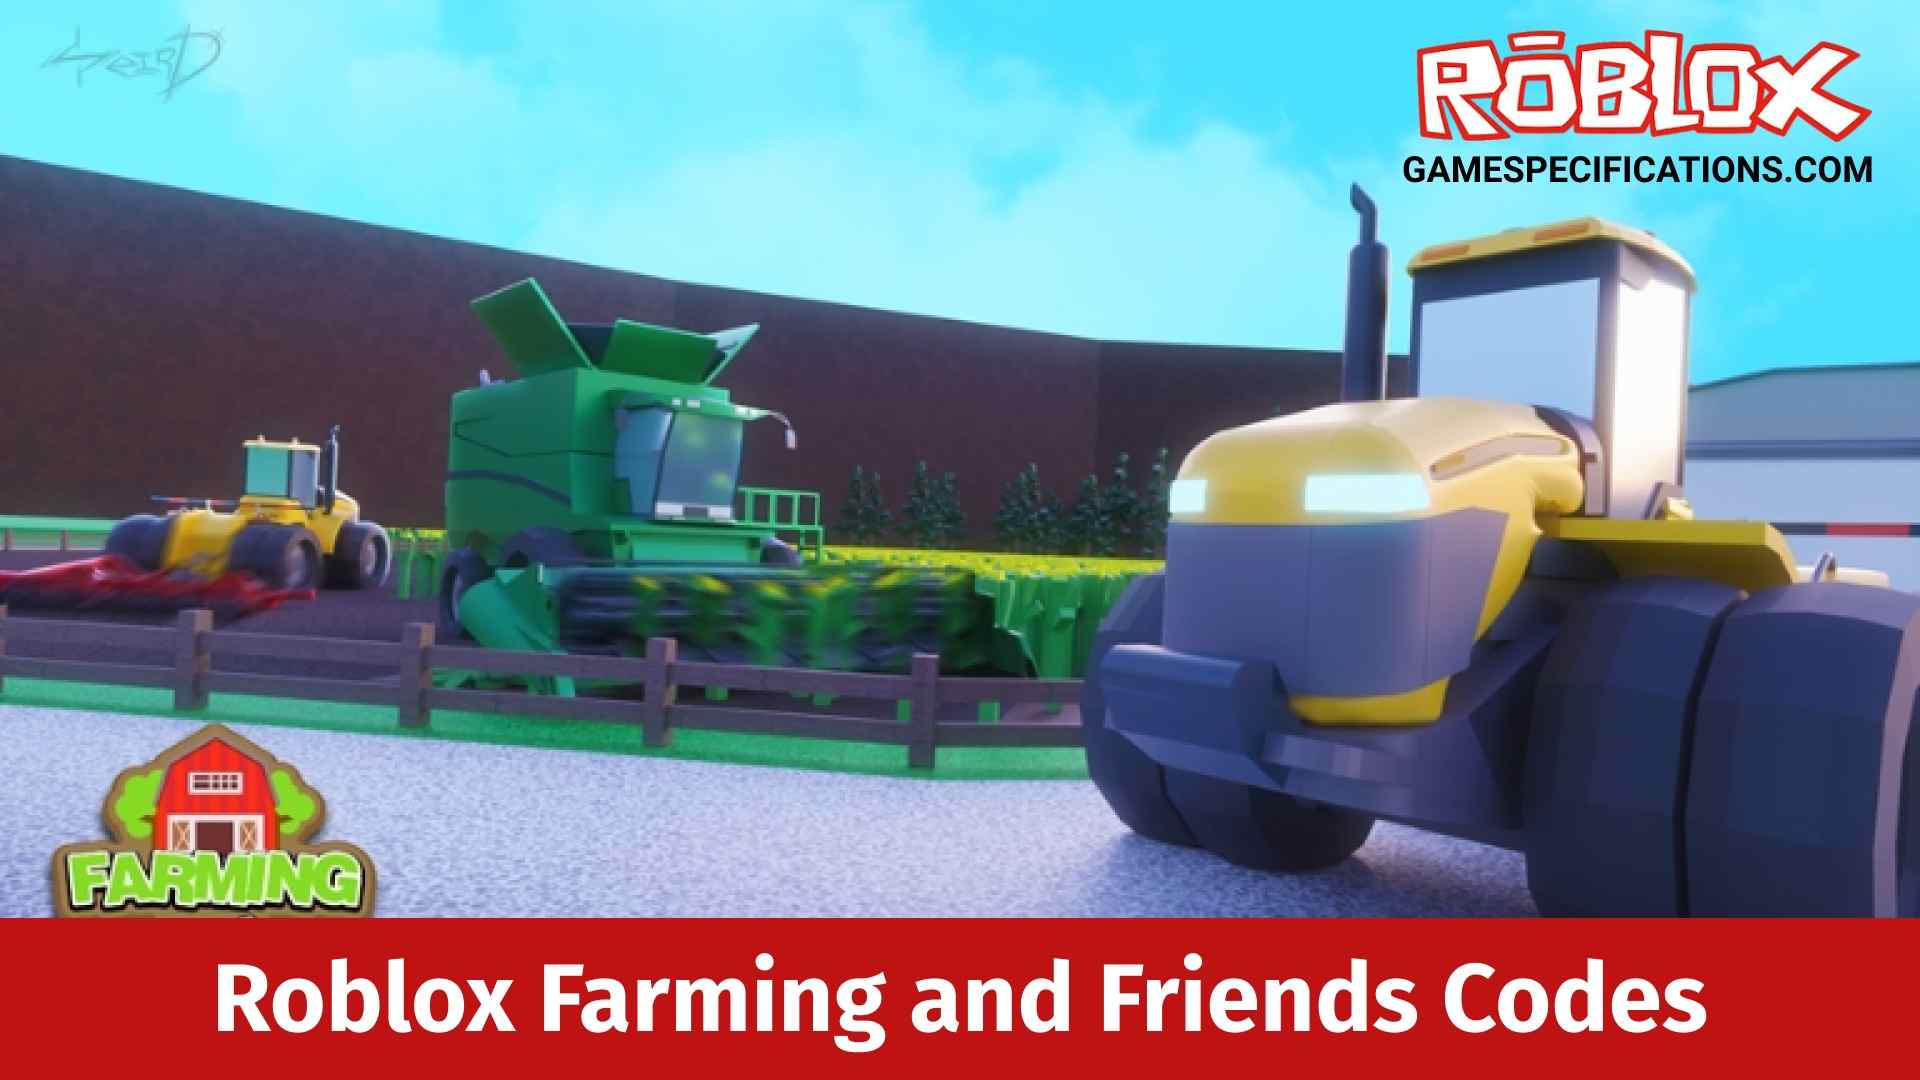 Roblox Farming And Friends Codes July 2021 Game Specifications - roblox farming simulator codes list